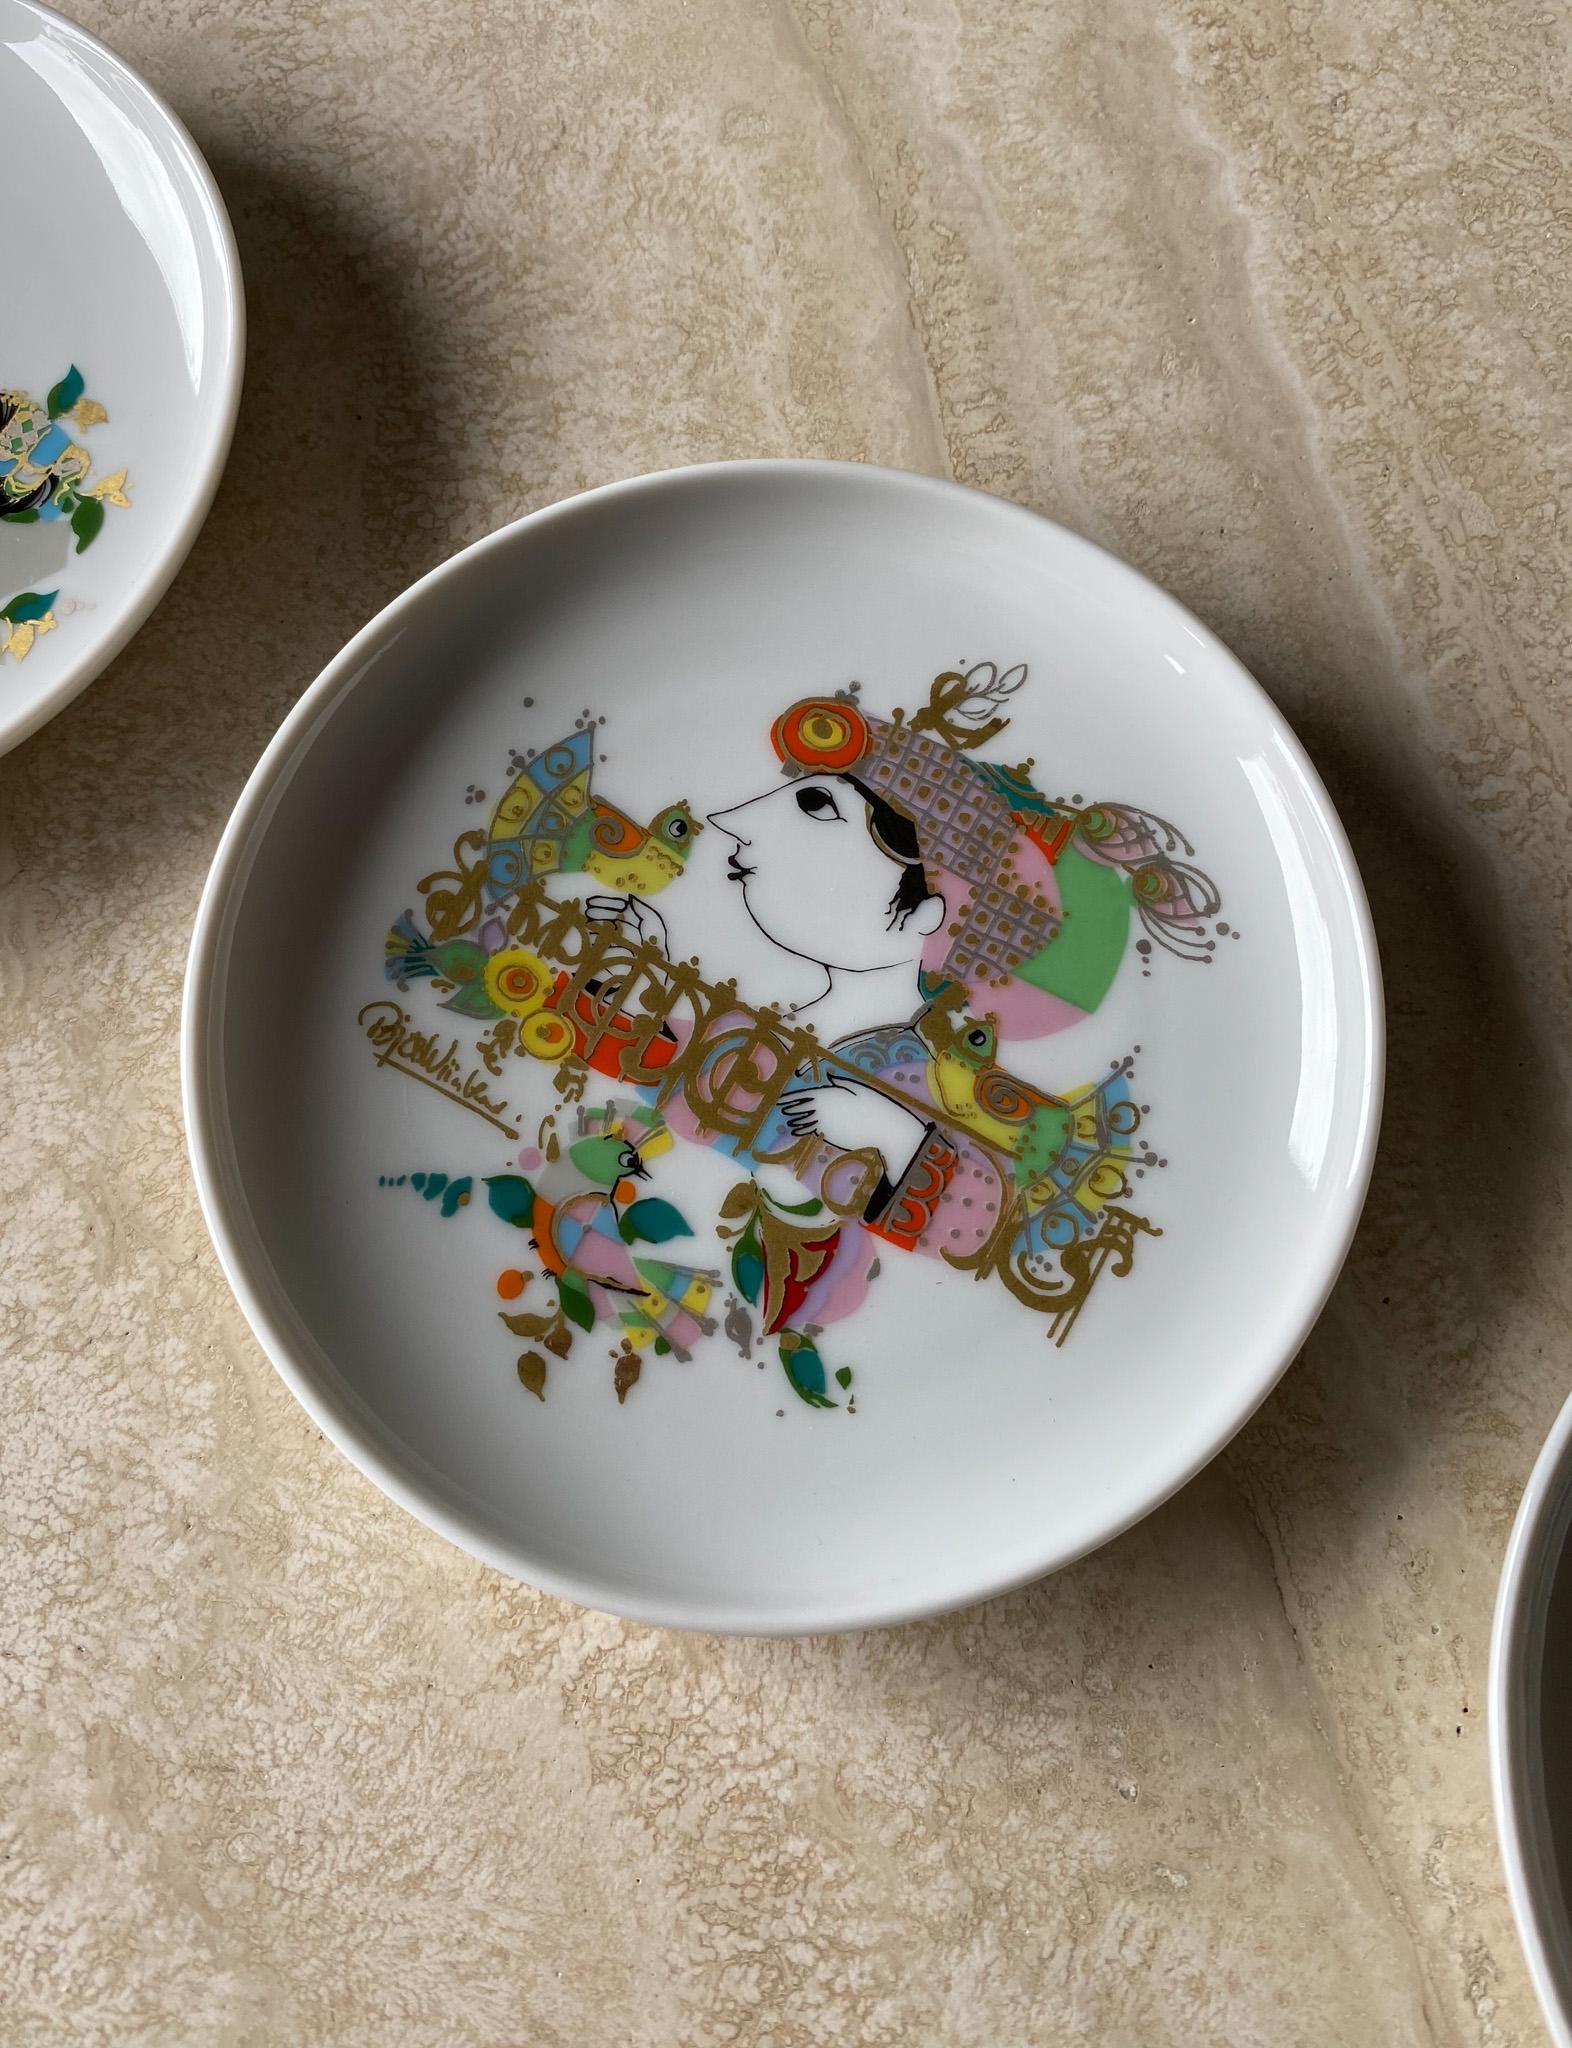 German Set Of 6 Hand Painted Dishes By Bjorn Winblad For Rosenthal 1970s.